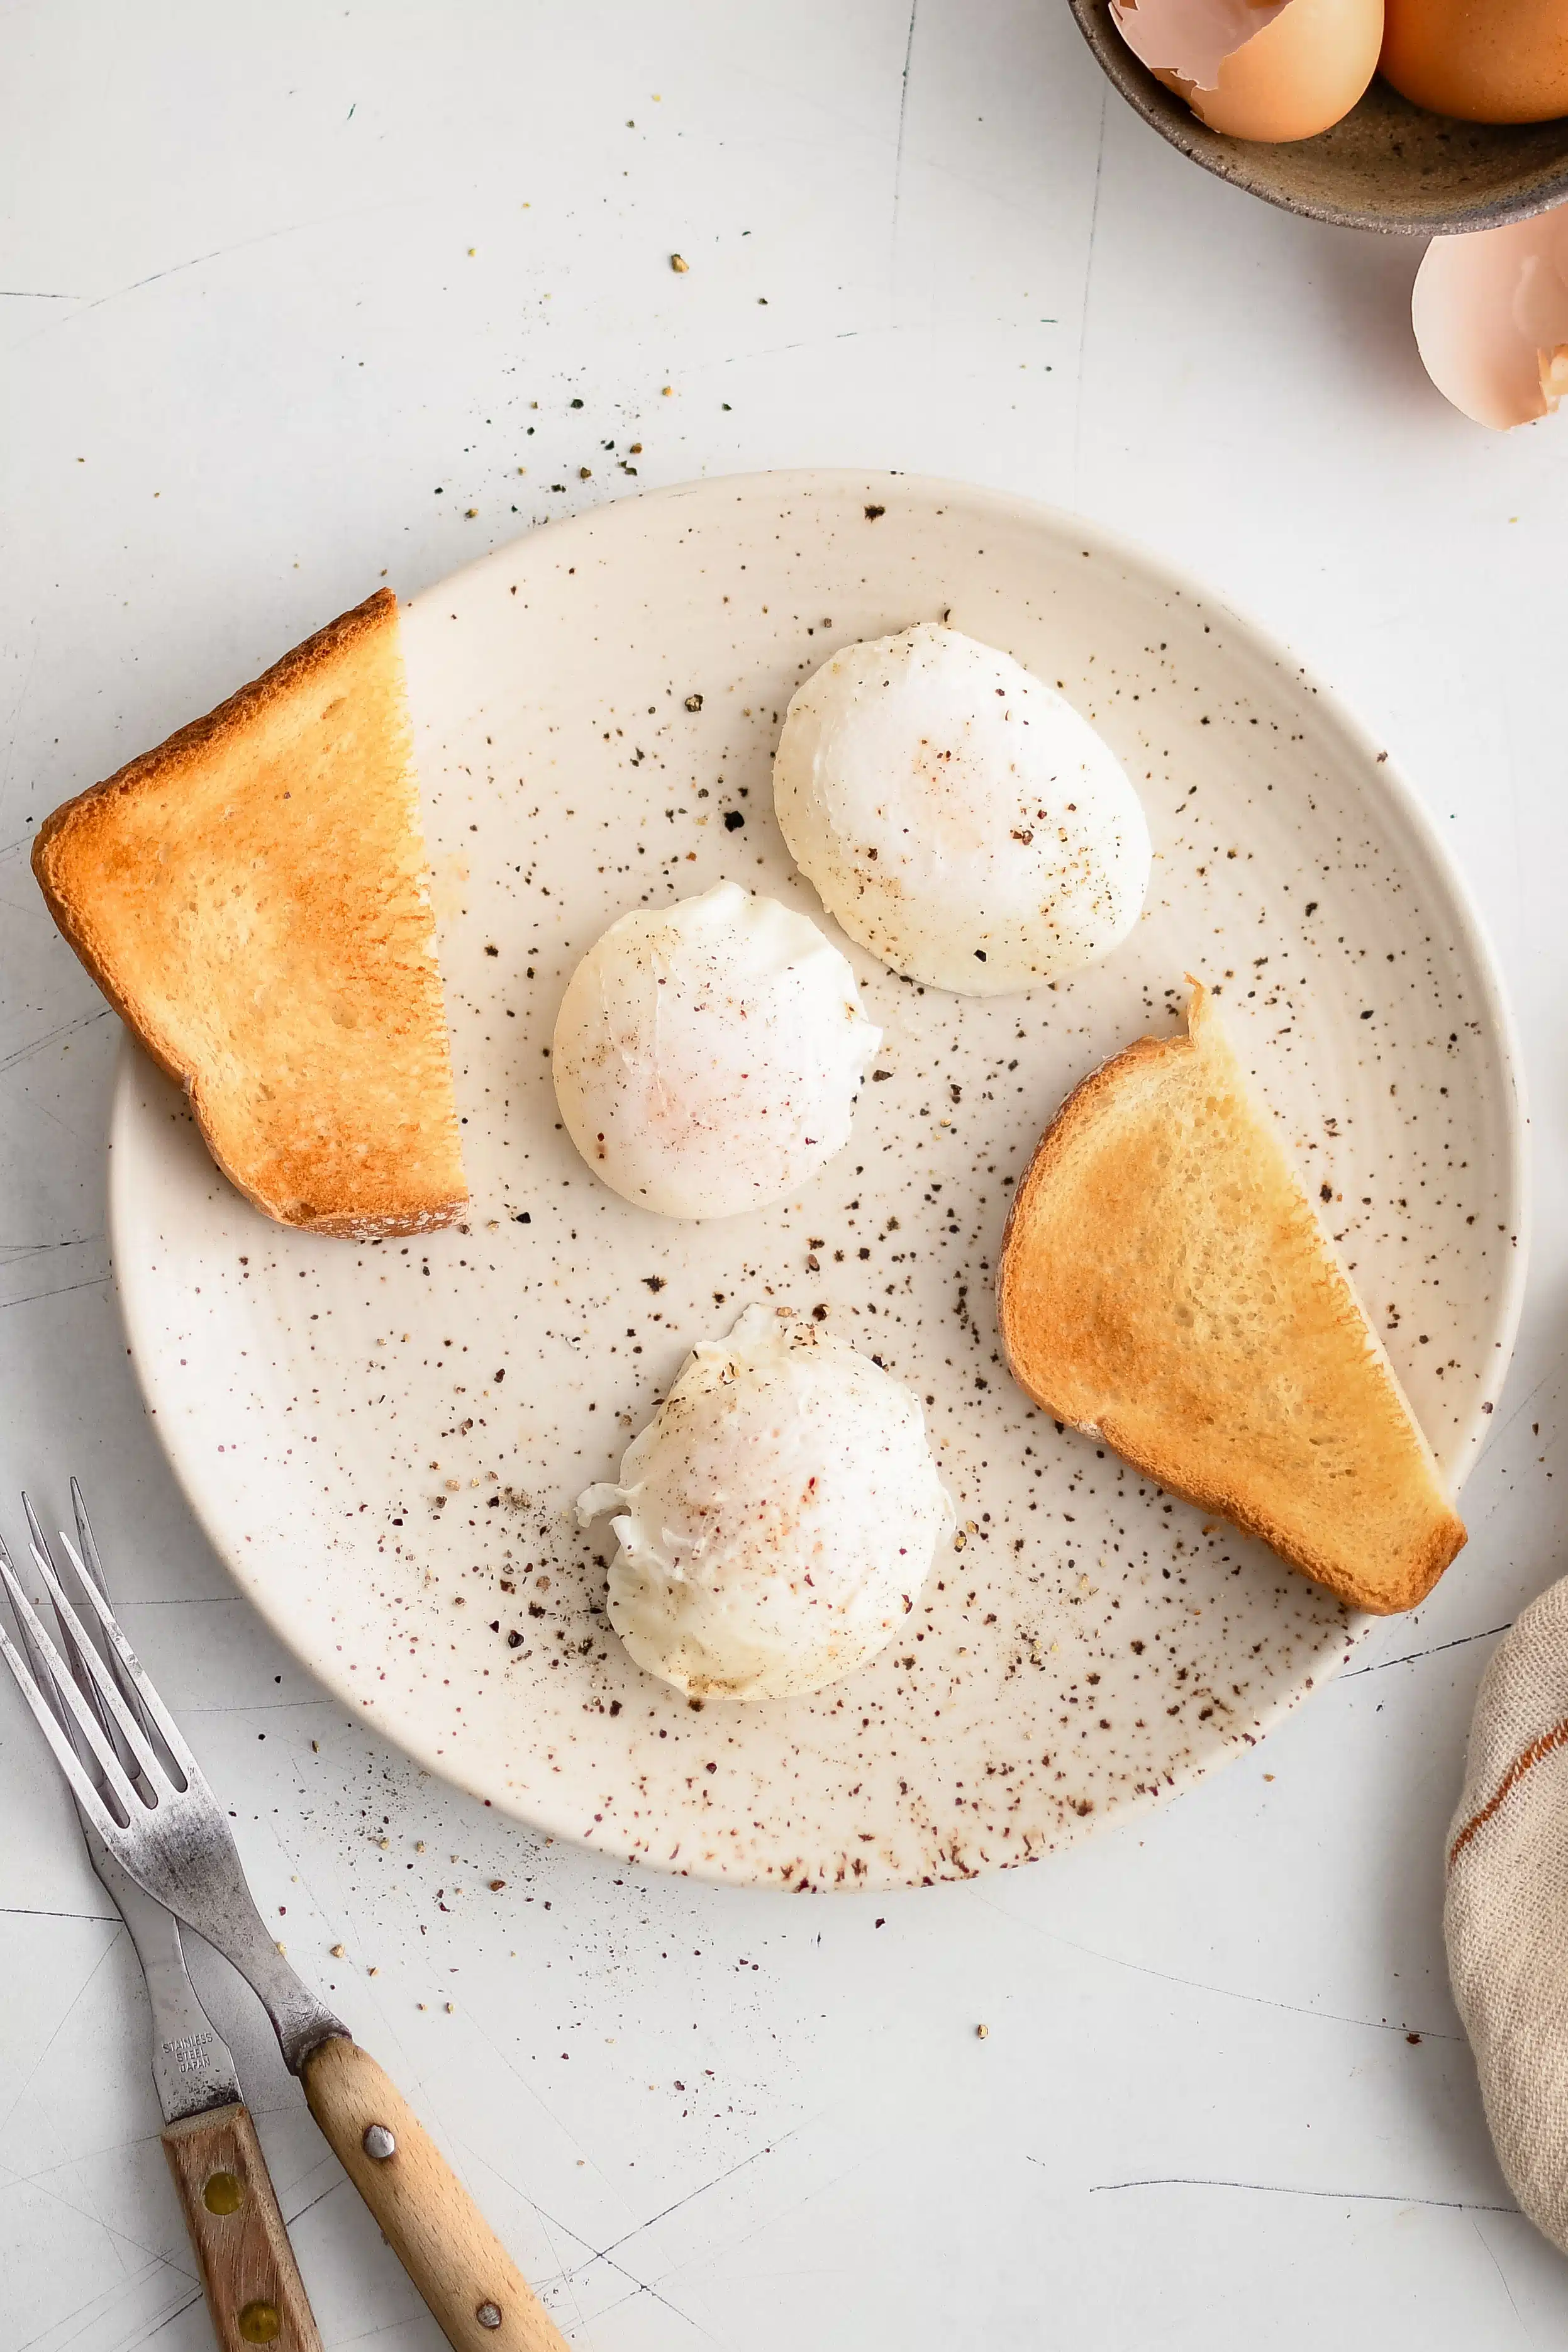 White plate with three poached eggs seasoned with black pepper and a piece of toasted bread sliced in half.